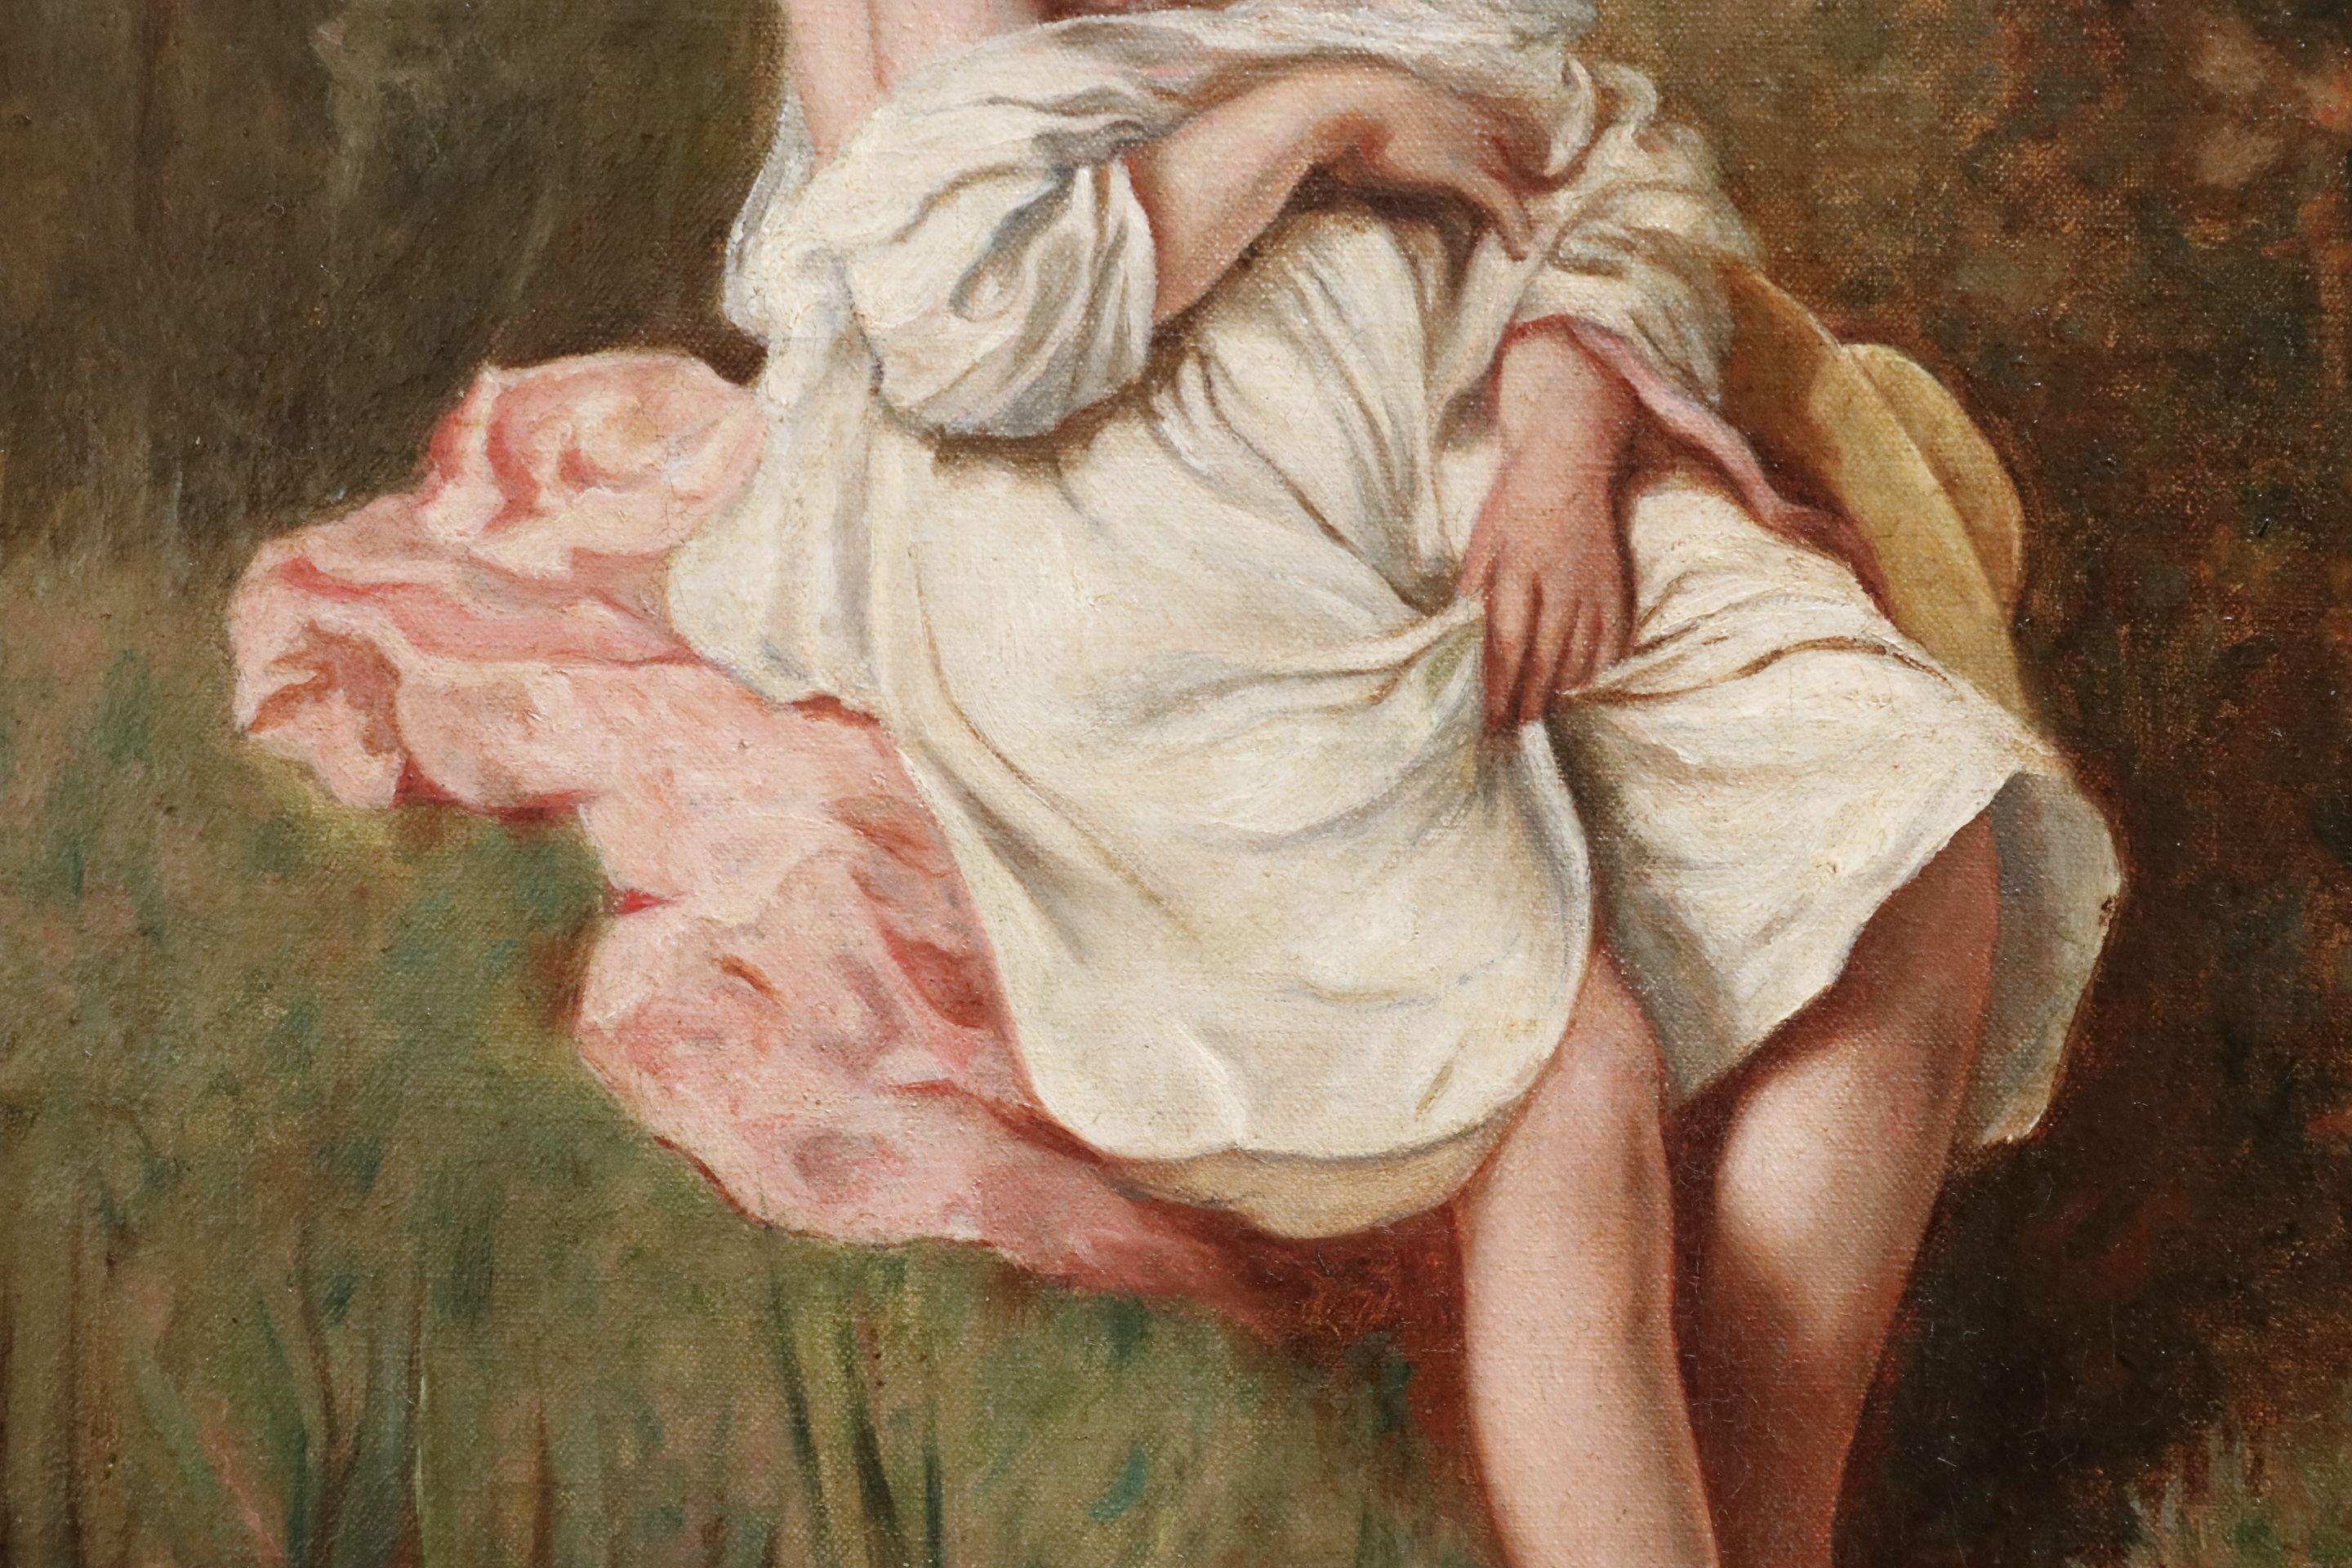 Oil on canvas circa 1880 by Charles Chaplin depicting a partially nude young woman sitting on a water's edge dipping her toe in the river. Signed lower left. Framed dimensions are 21 inches high by 16 inches wide.

Born in Les Andelys, Eure, France